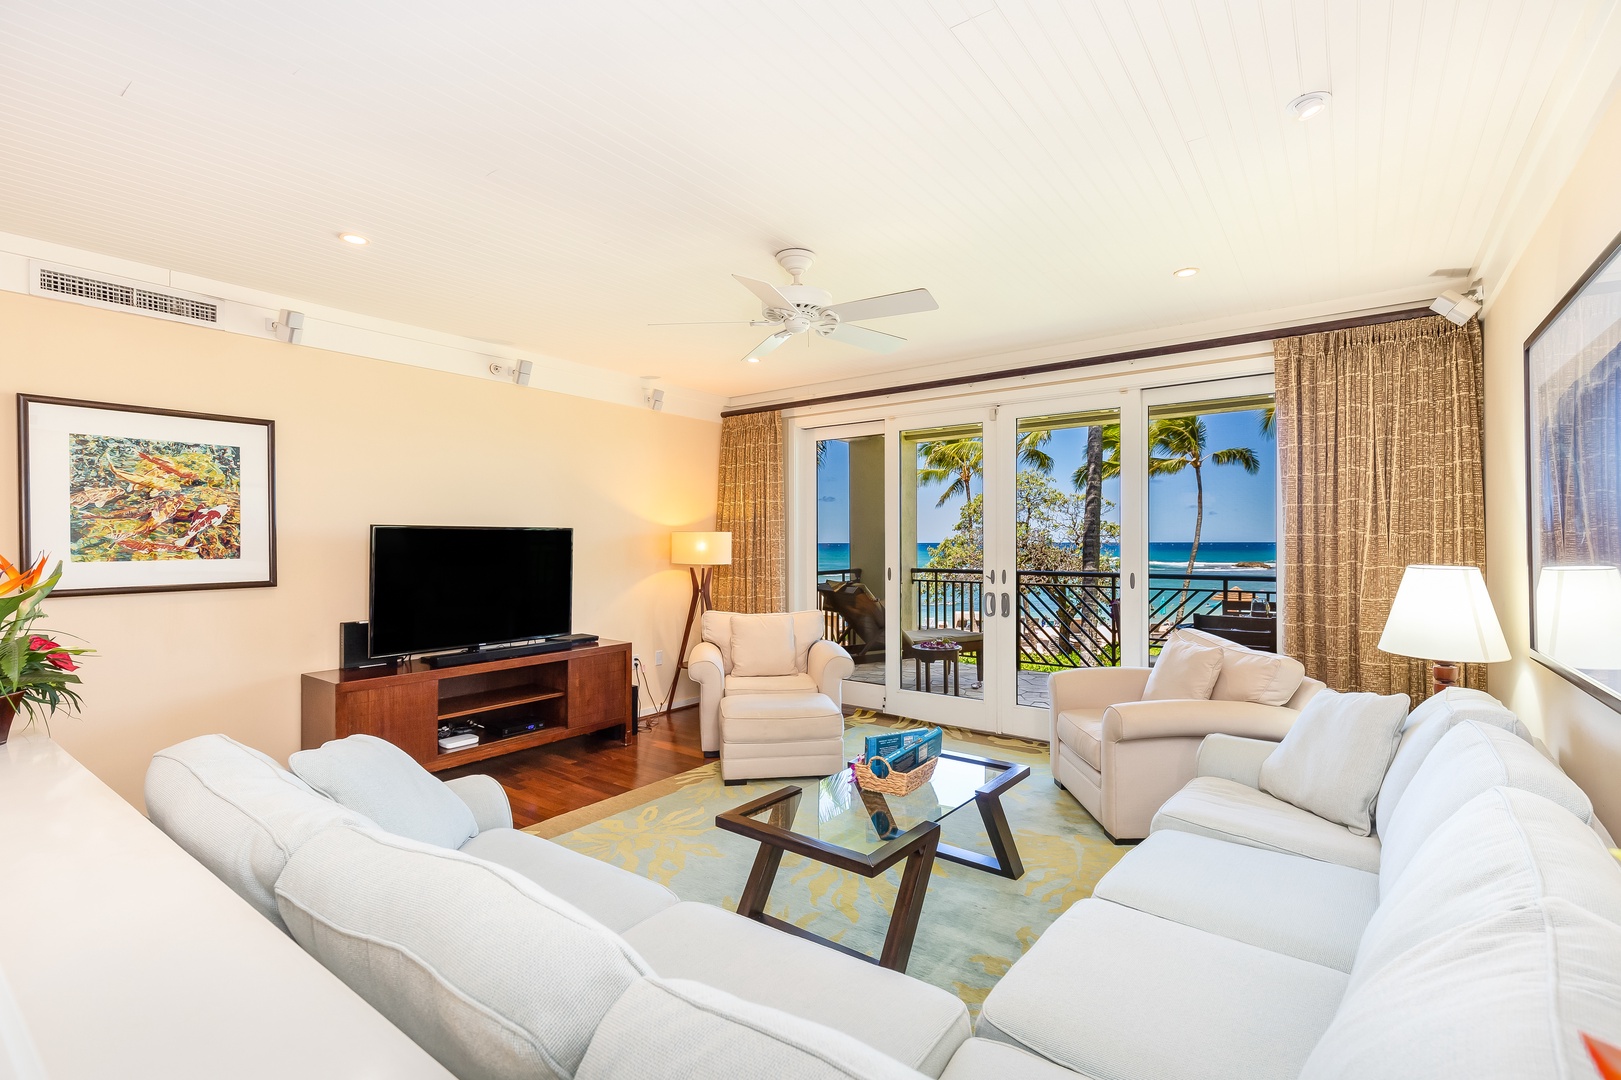 Kahuku Vacation Rentals, Turtle Bay Villas 301 - perfectly desirable space for up to 10 guests.